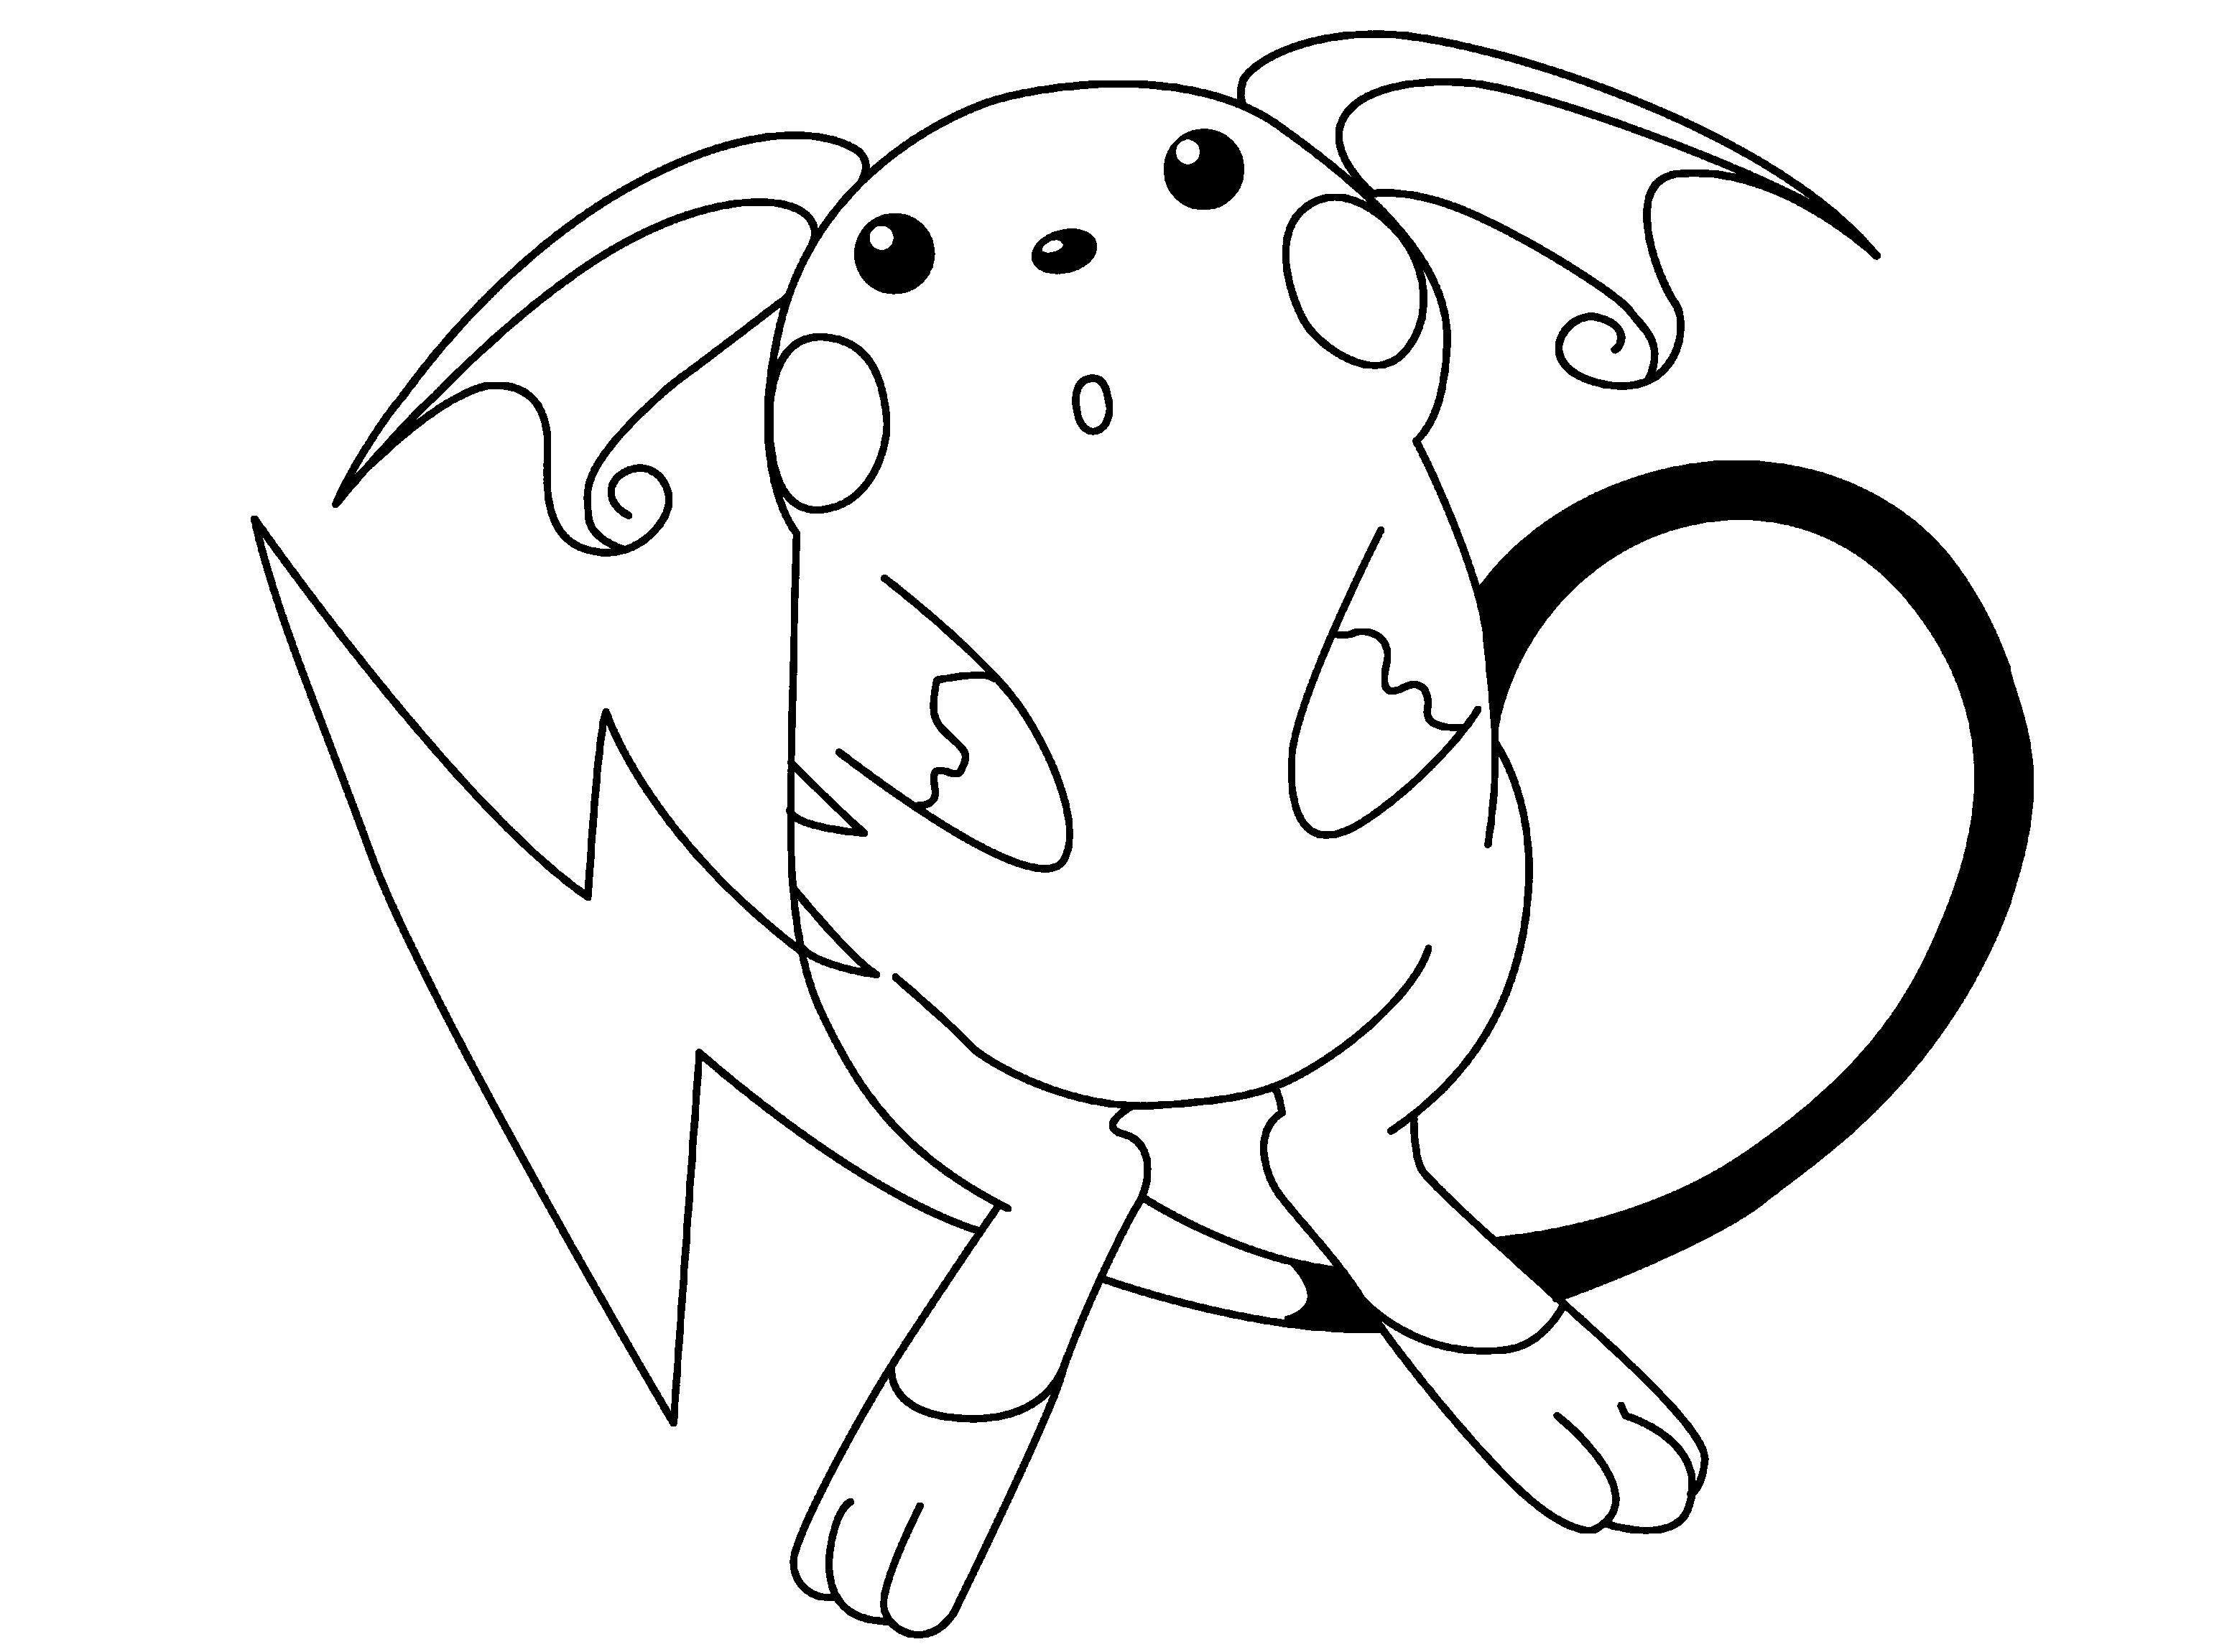 Simple Pokemon coloring page